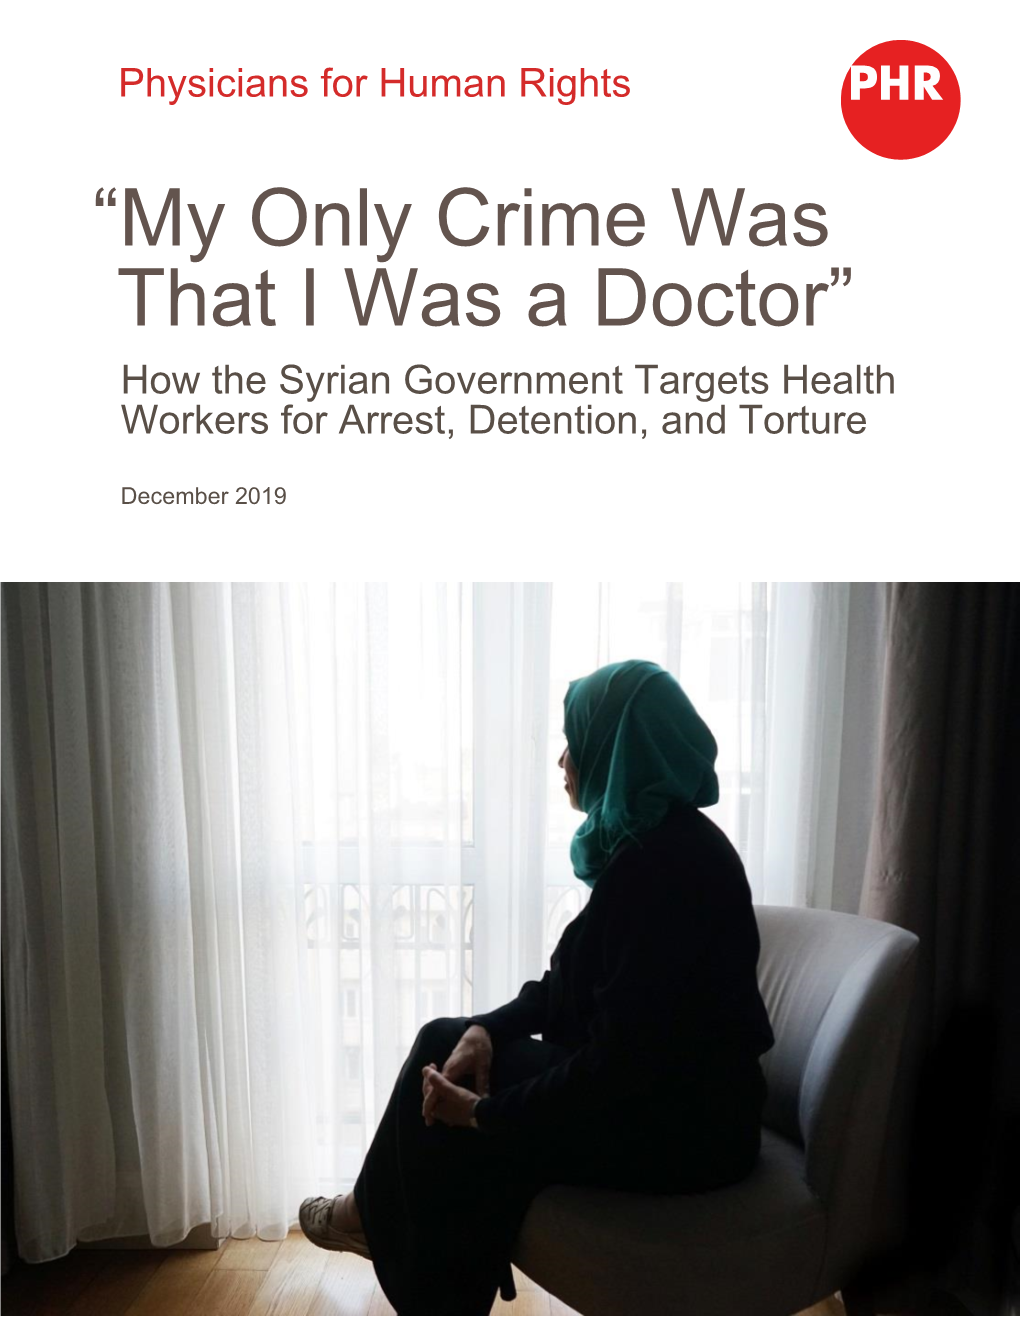 “My Only Crime Was That I Was a Doctor” How the Syrian Government Targets Health Workers for Arrest, Detention, and Torture